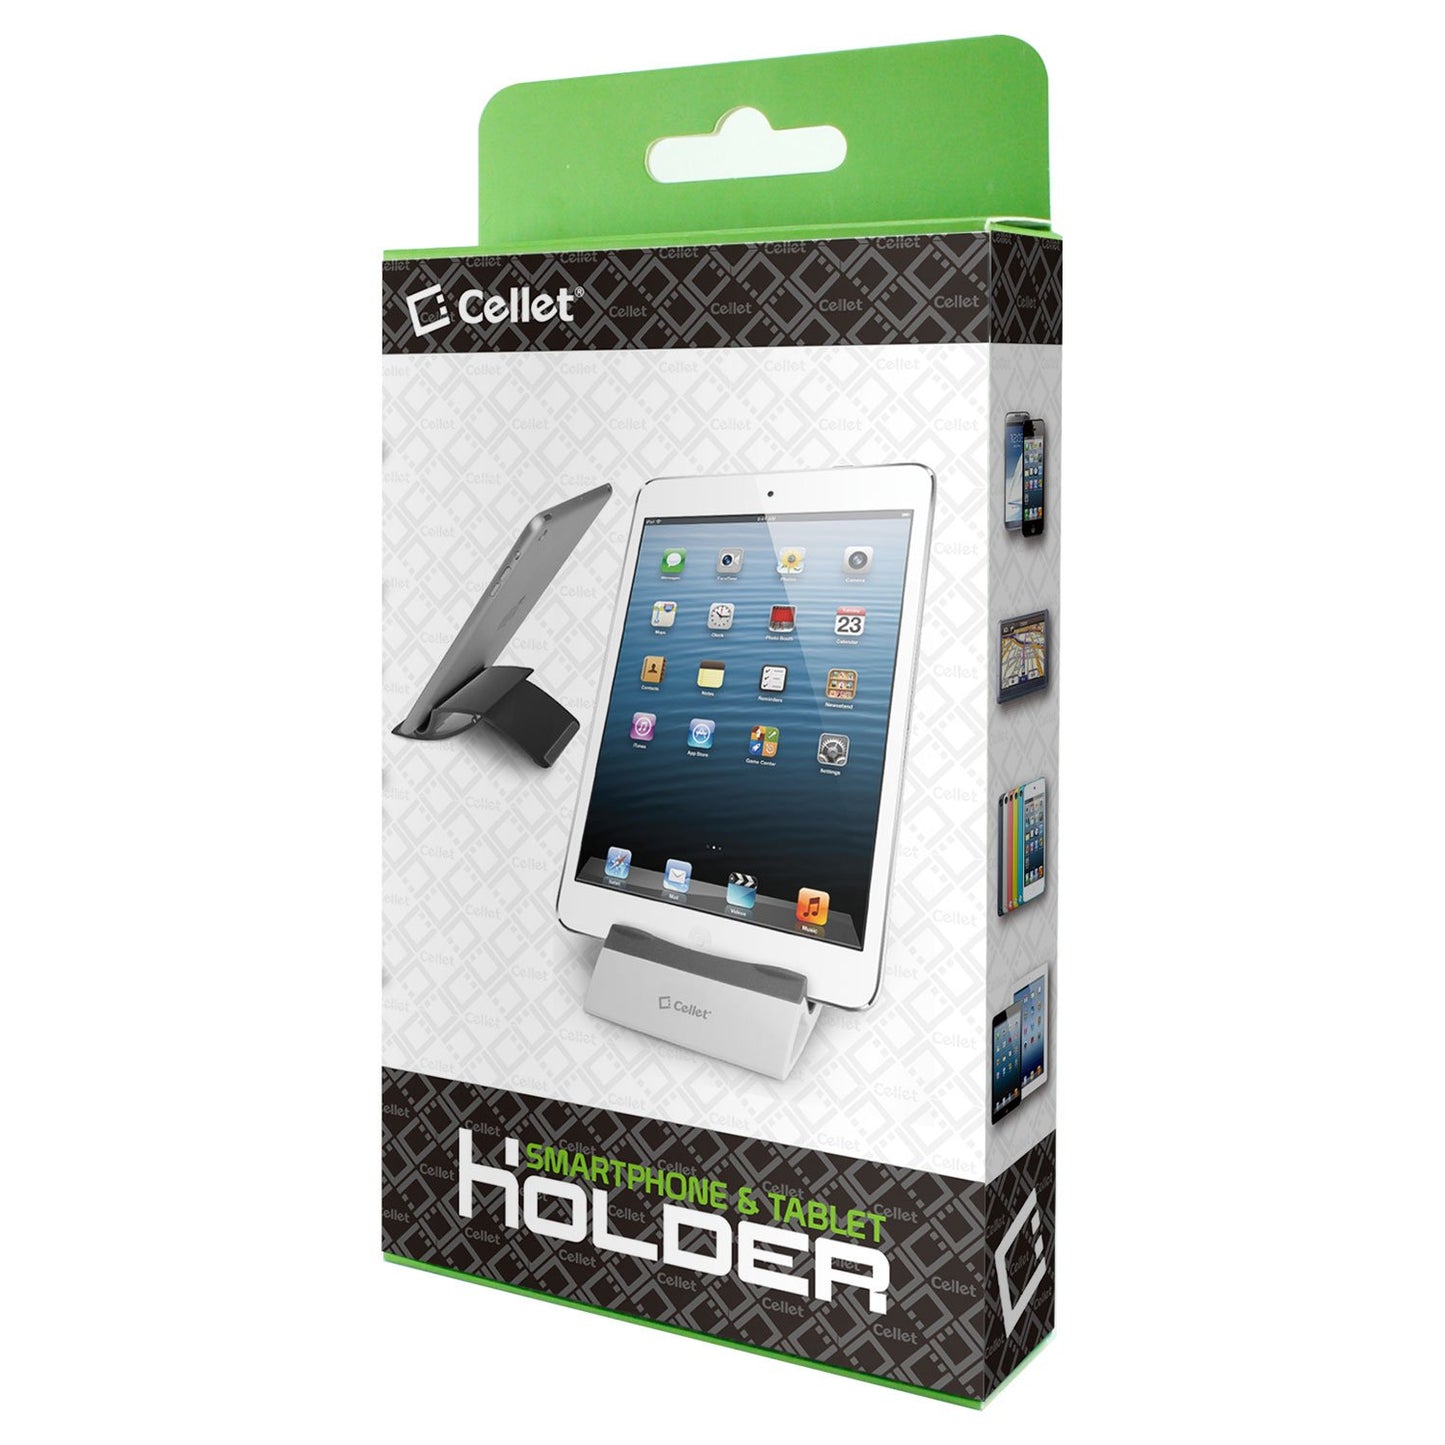 PHDA108WT - Cellet Universal Smartphone and Tablet Display Stand - White